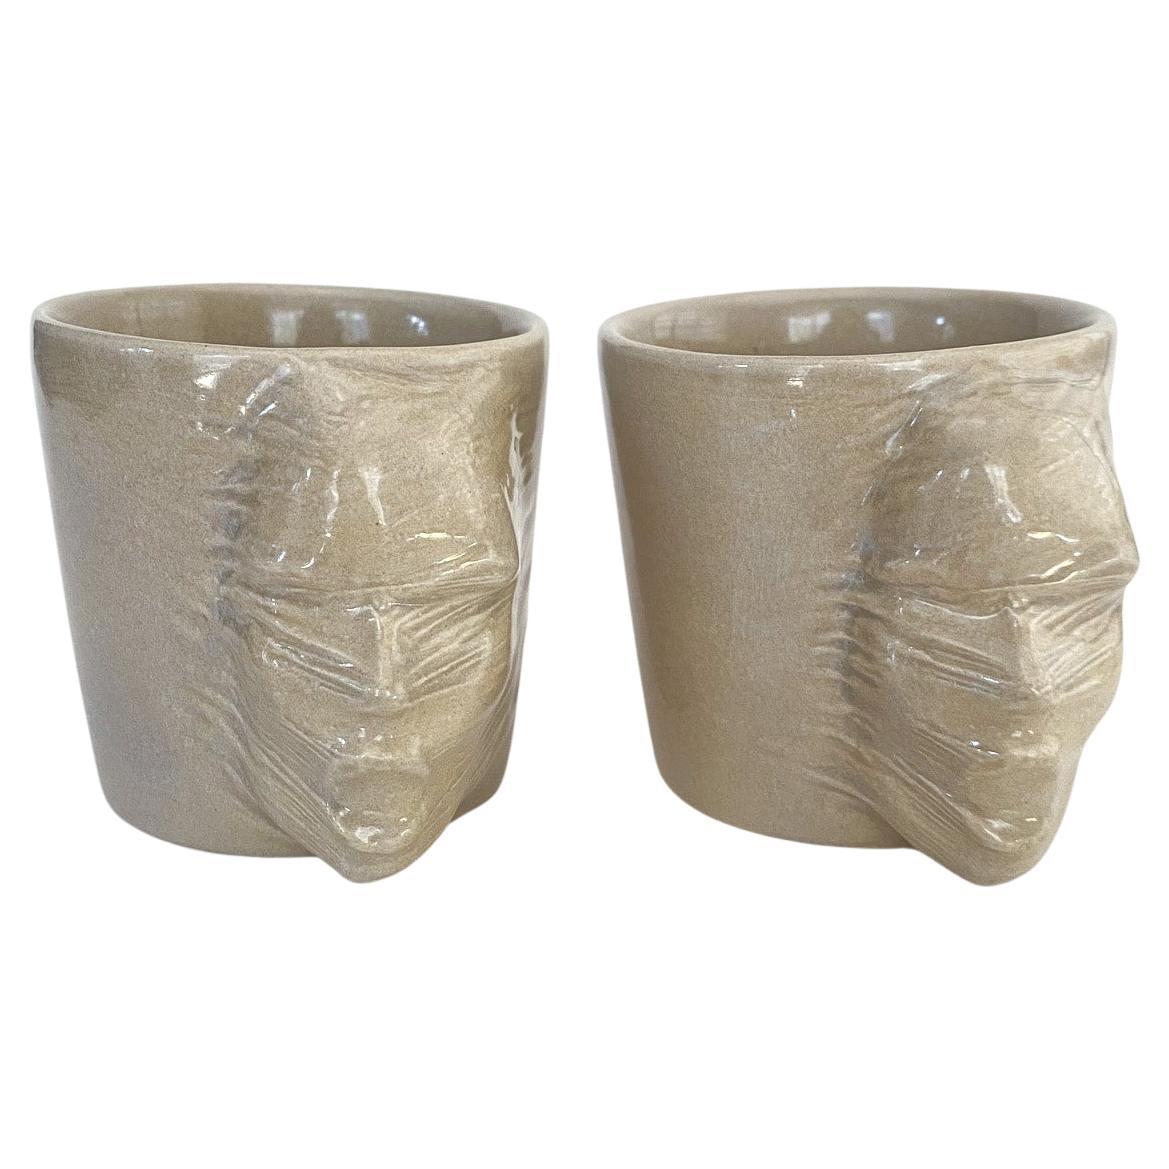 Sculptural Ceramic Cups Set of 2 by Hulya Sozer, Face Silhouette, Sand Beige